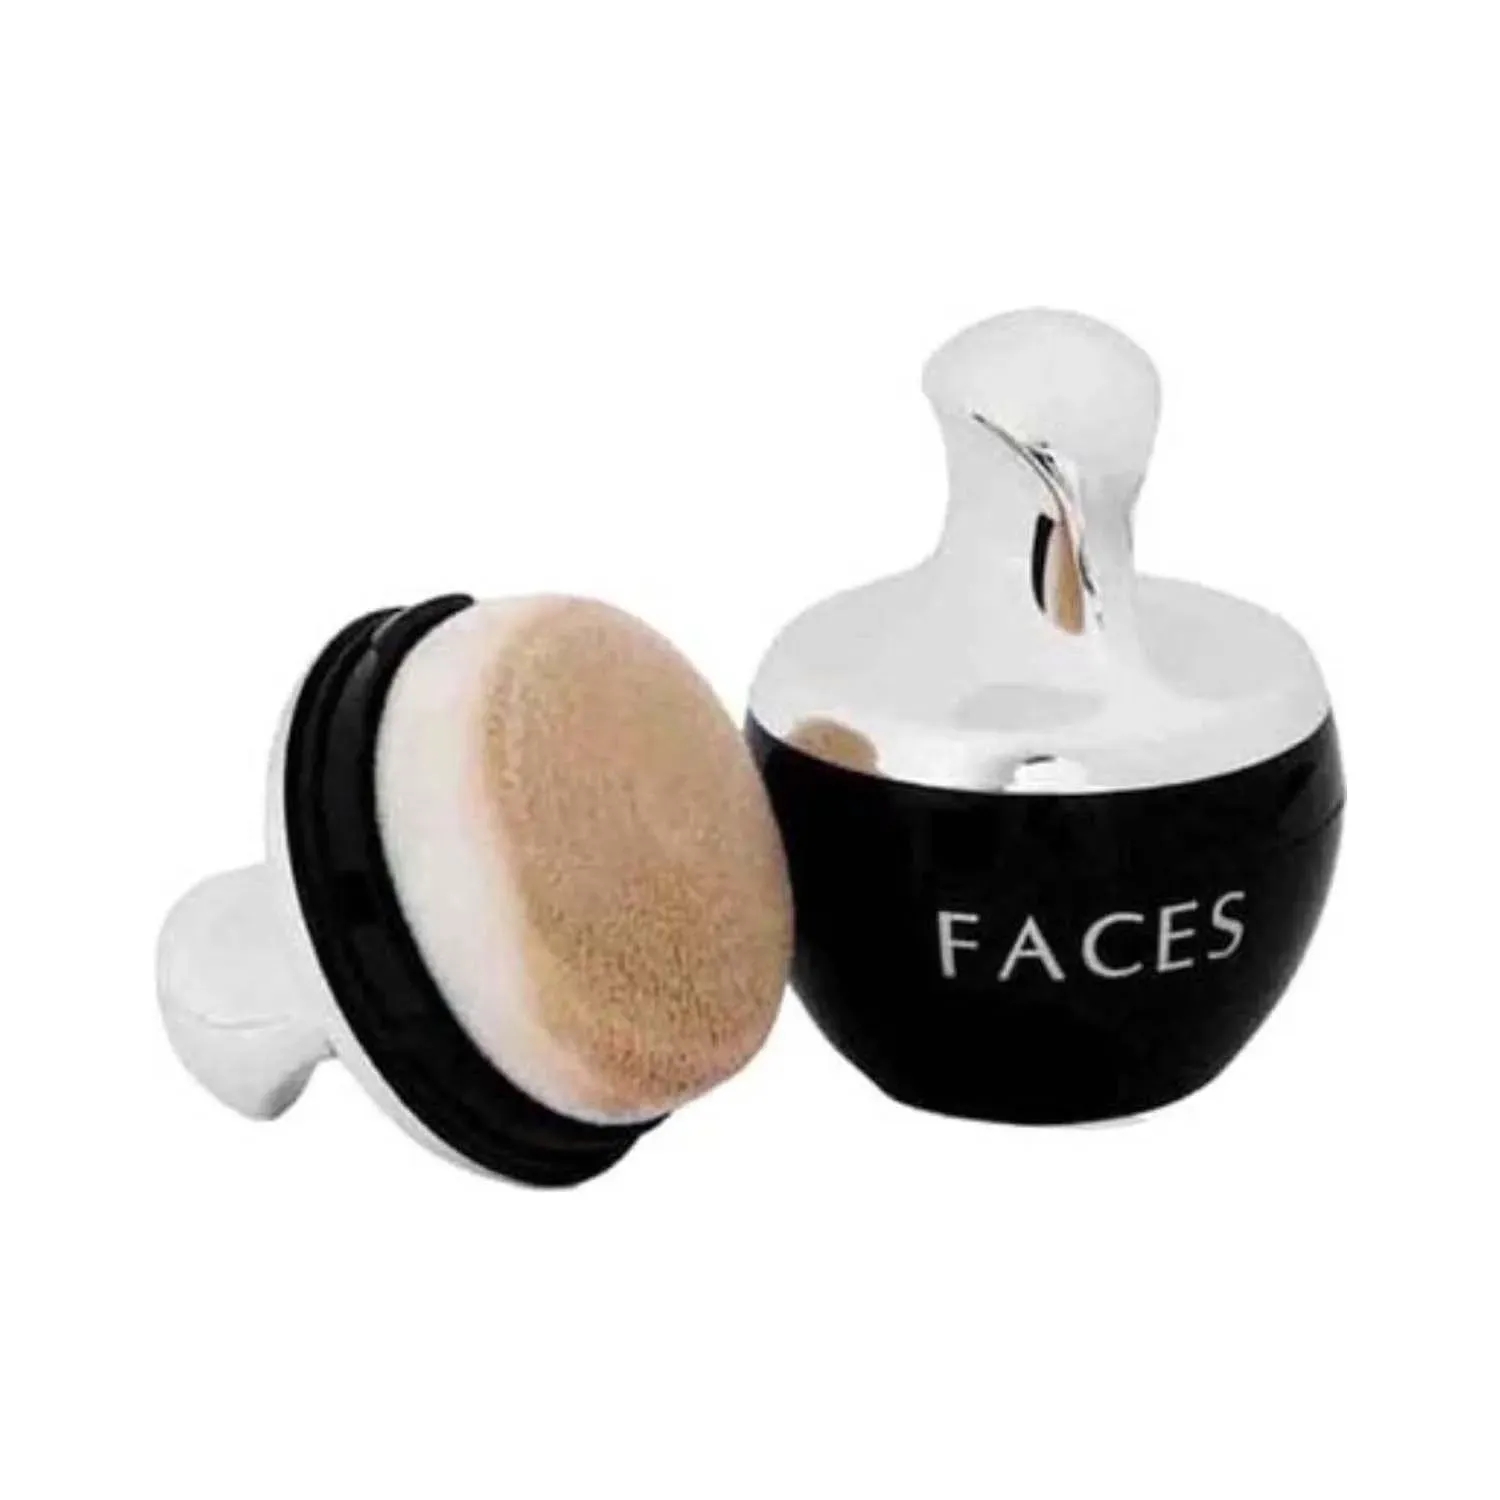 Faces Canada | Faces Canada Ultime Pro Mineral Loose Powder - 03 Sand Beige (7g)